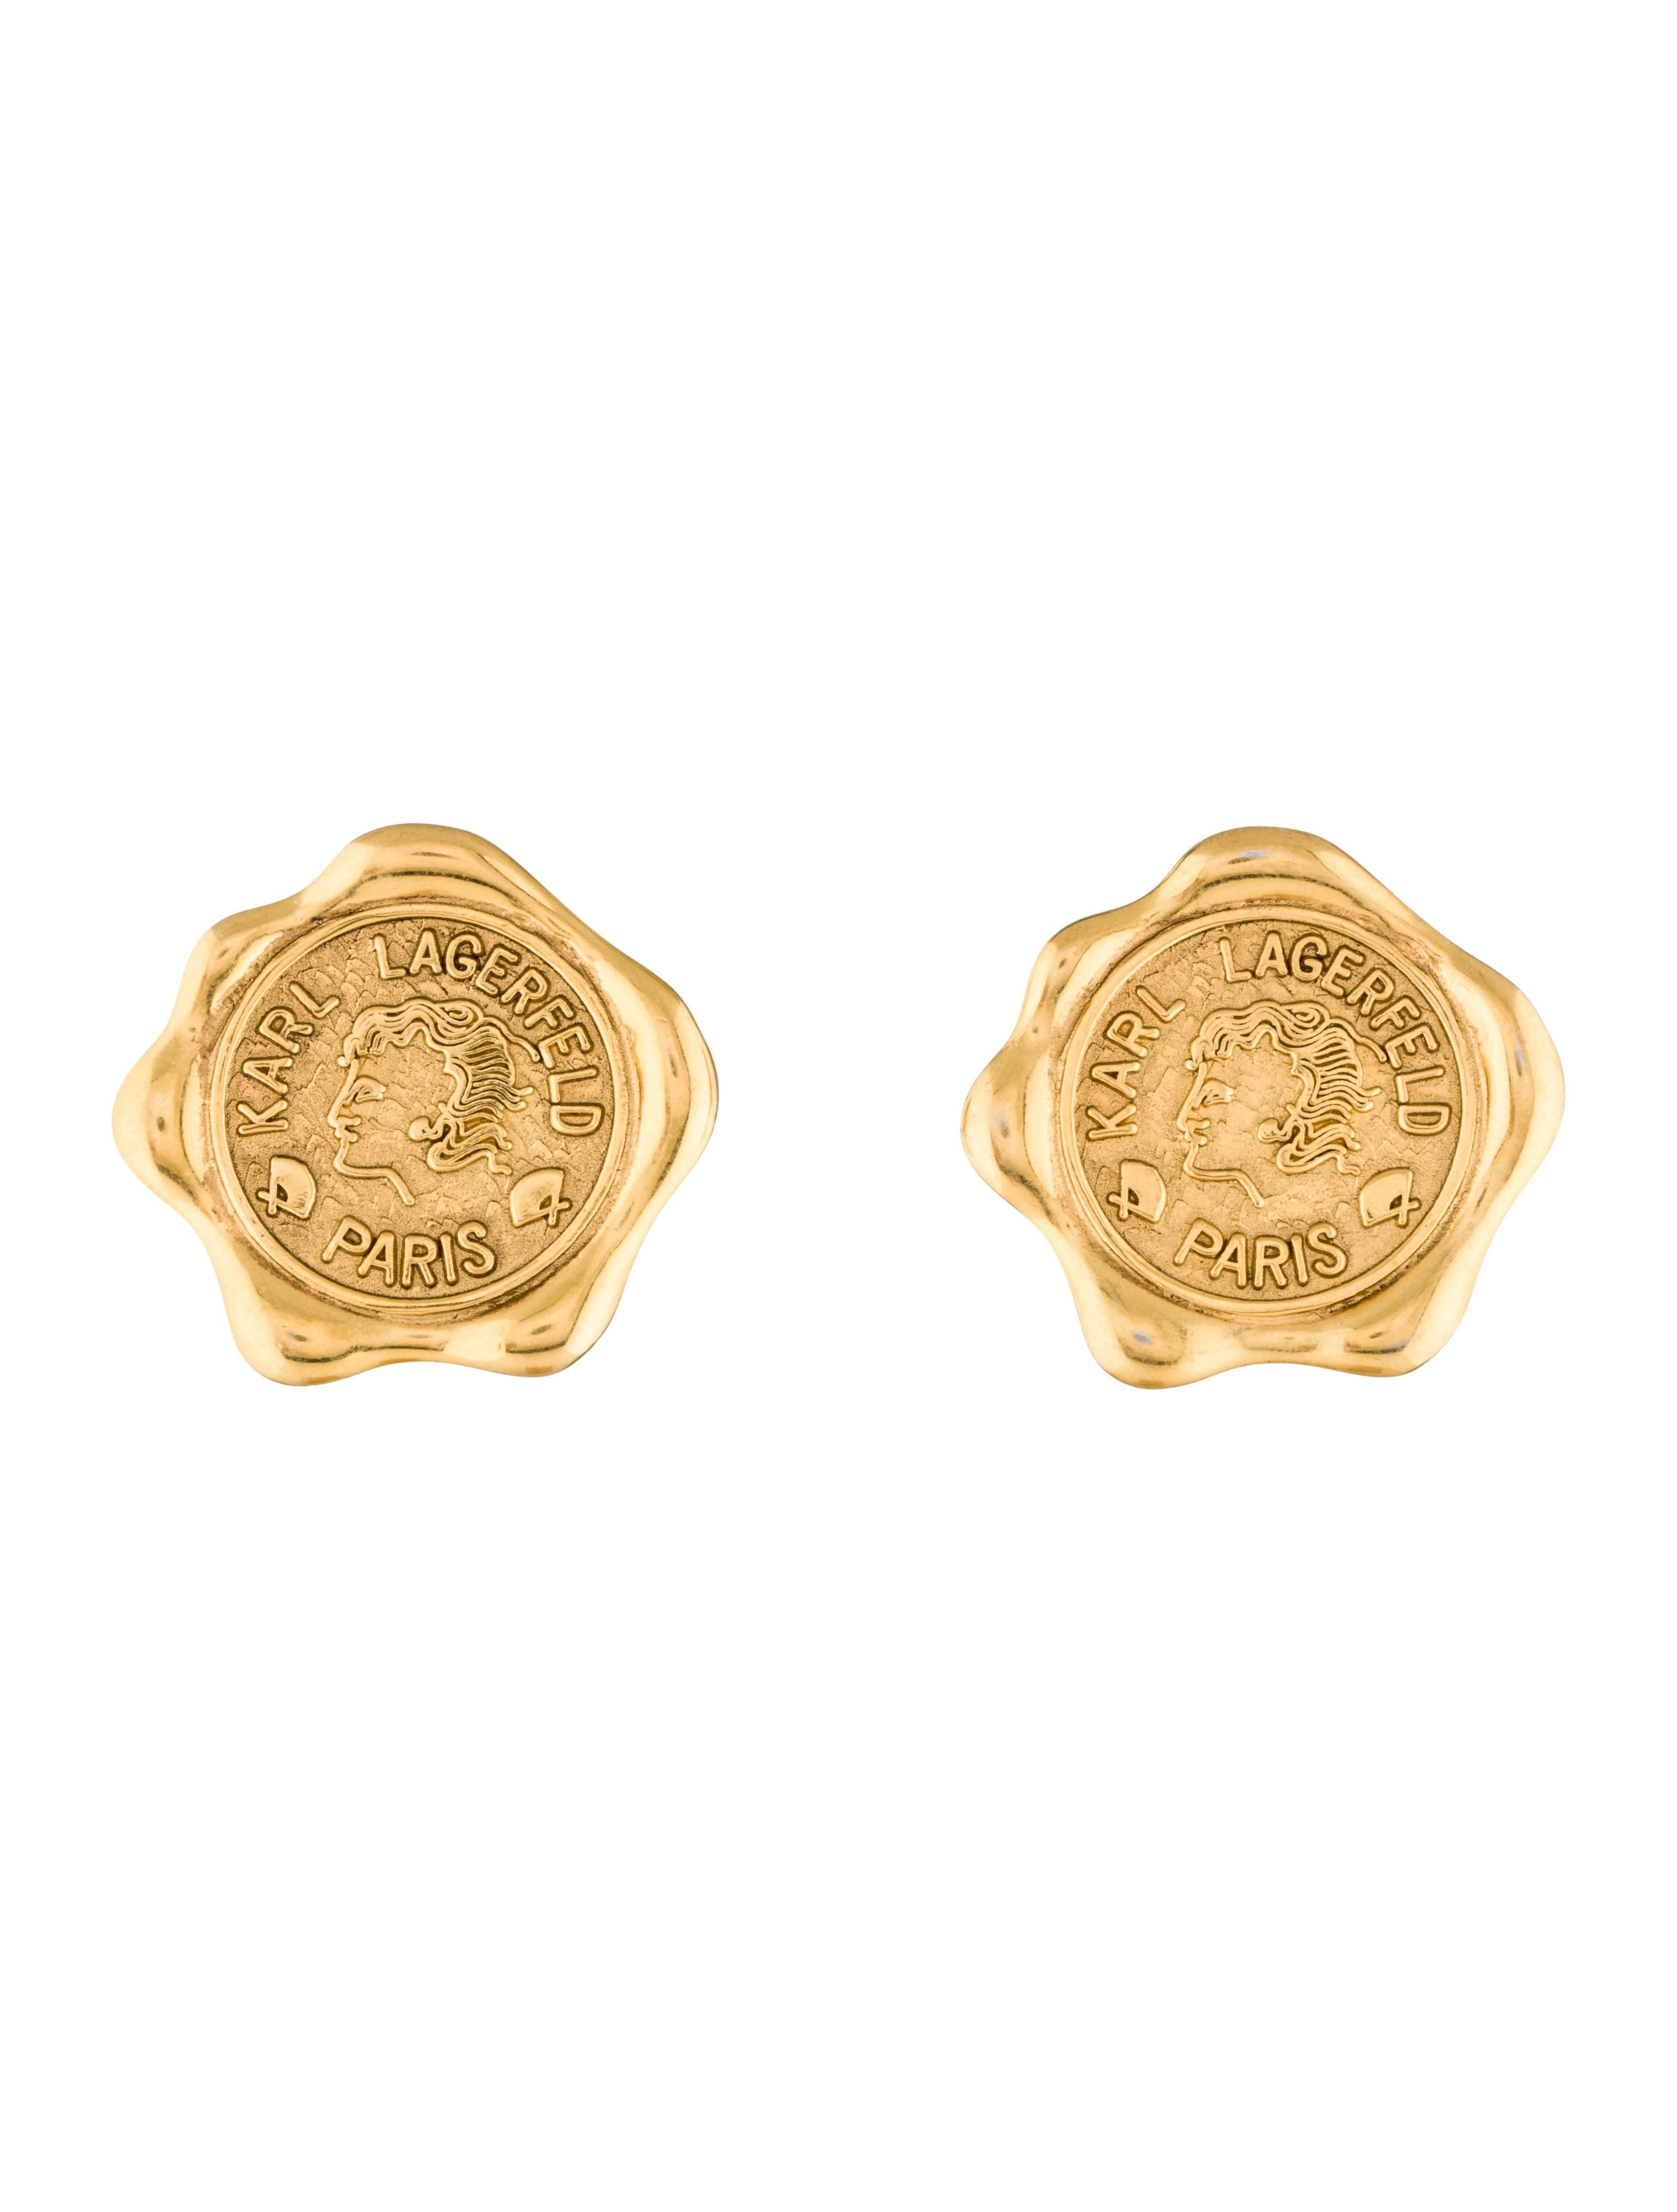 Karl Lagerfeld vintage 90s wax seal earrings in goldtone.
Fronts read Karl Lagerfeld, Paris. Signed 'KL' at backs.

Approximately 1.5